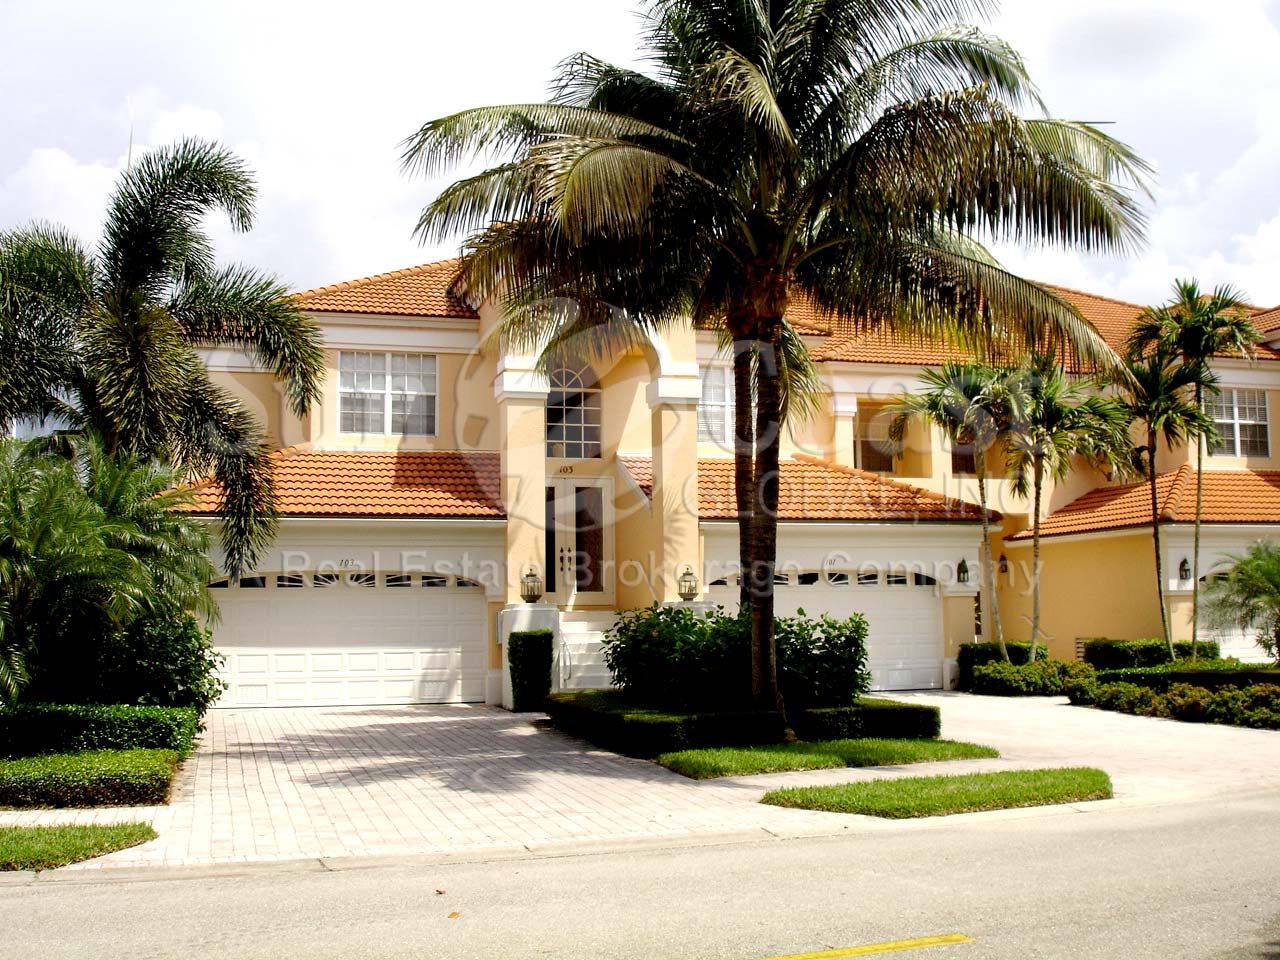 Yacht Harbour Cove are 4-unit condos on the water with 2 car garages and tile roofs.